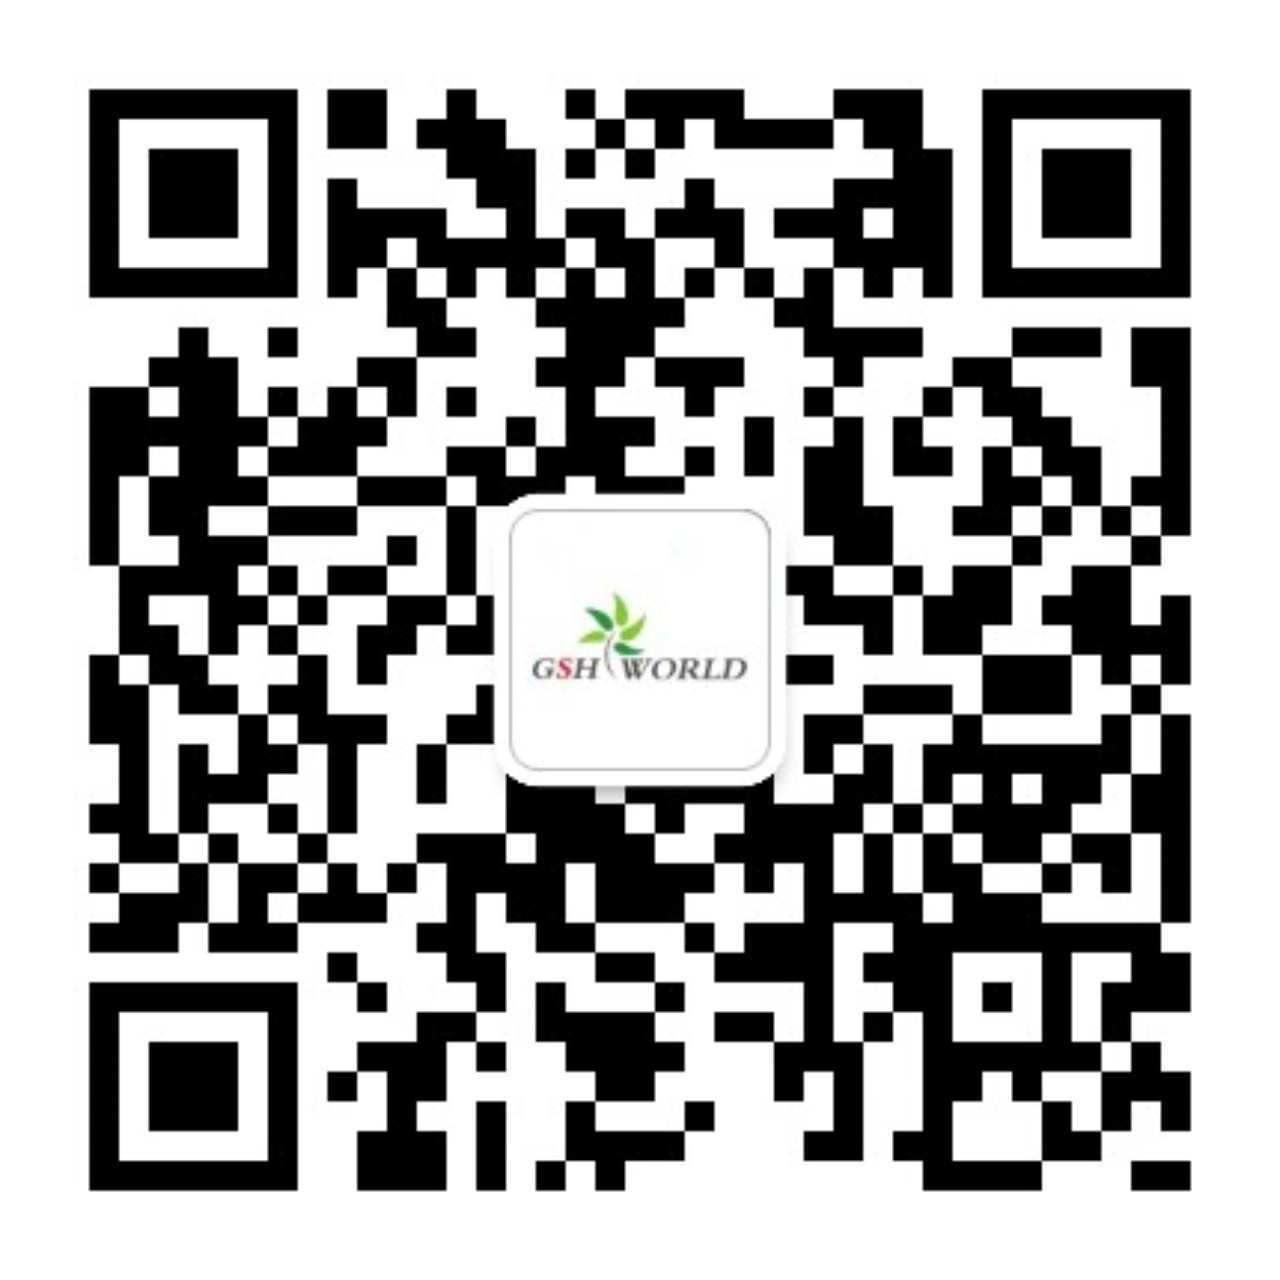 Welcome to pay attention to our WeChat public account